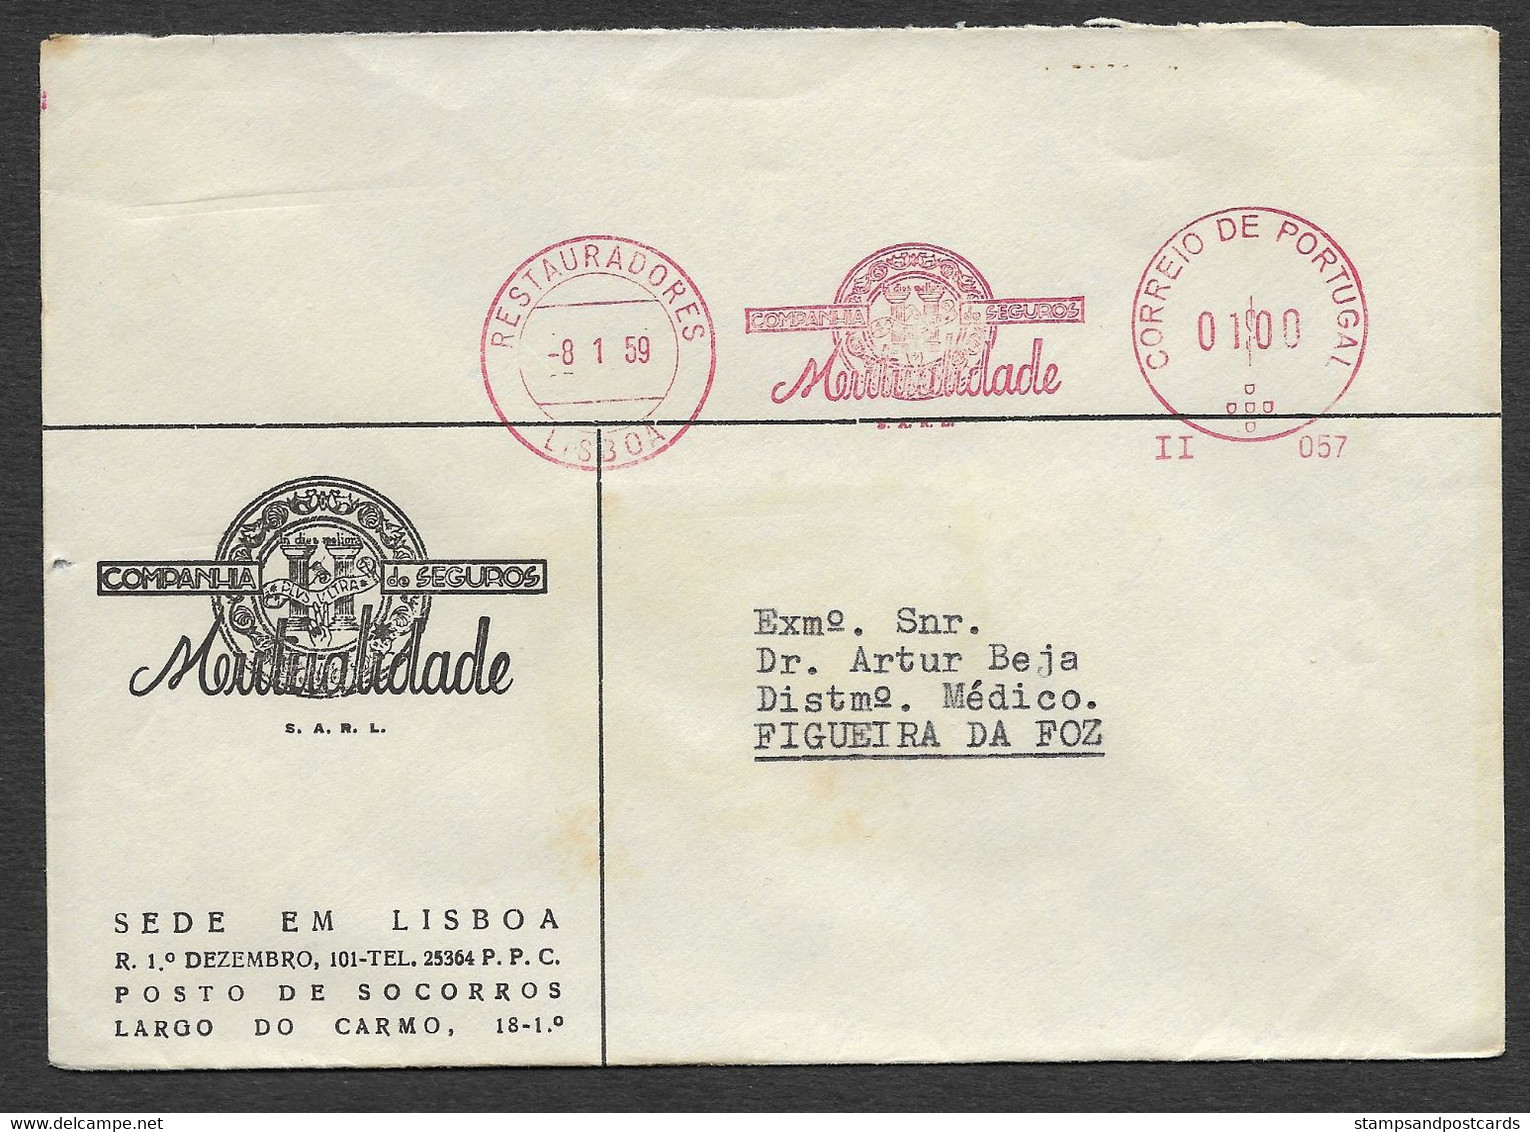 Portugal Lettre Assurance Mutualidade Vignette EMA Cachet Rouge 1959 Cover Cinderella Insurance Co. Franking Meter - Covers & Documents